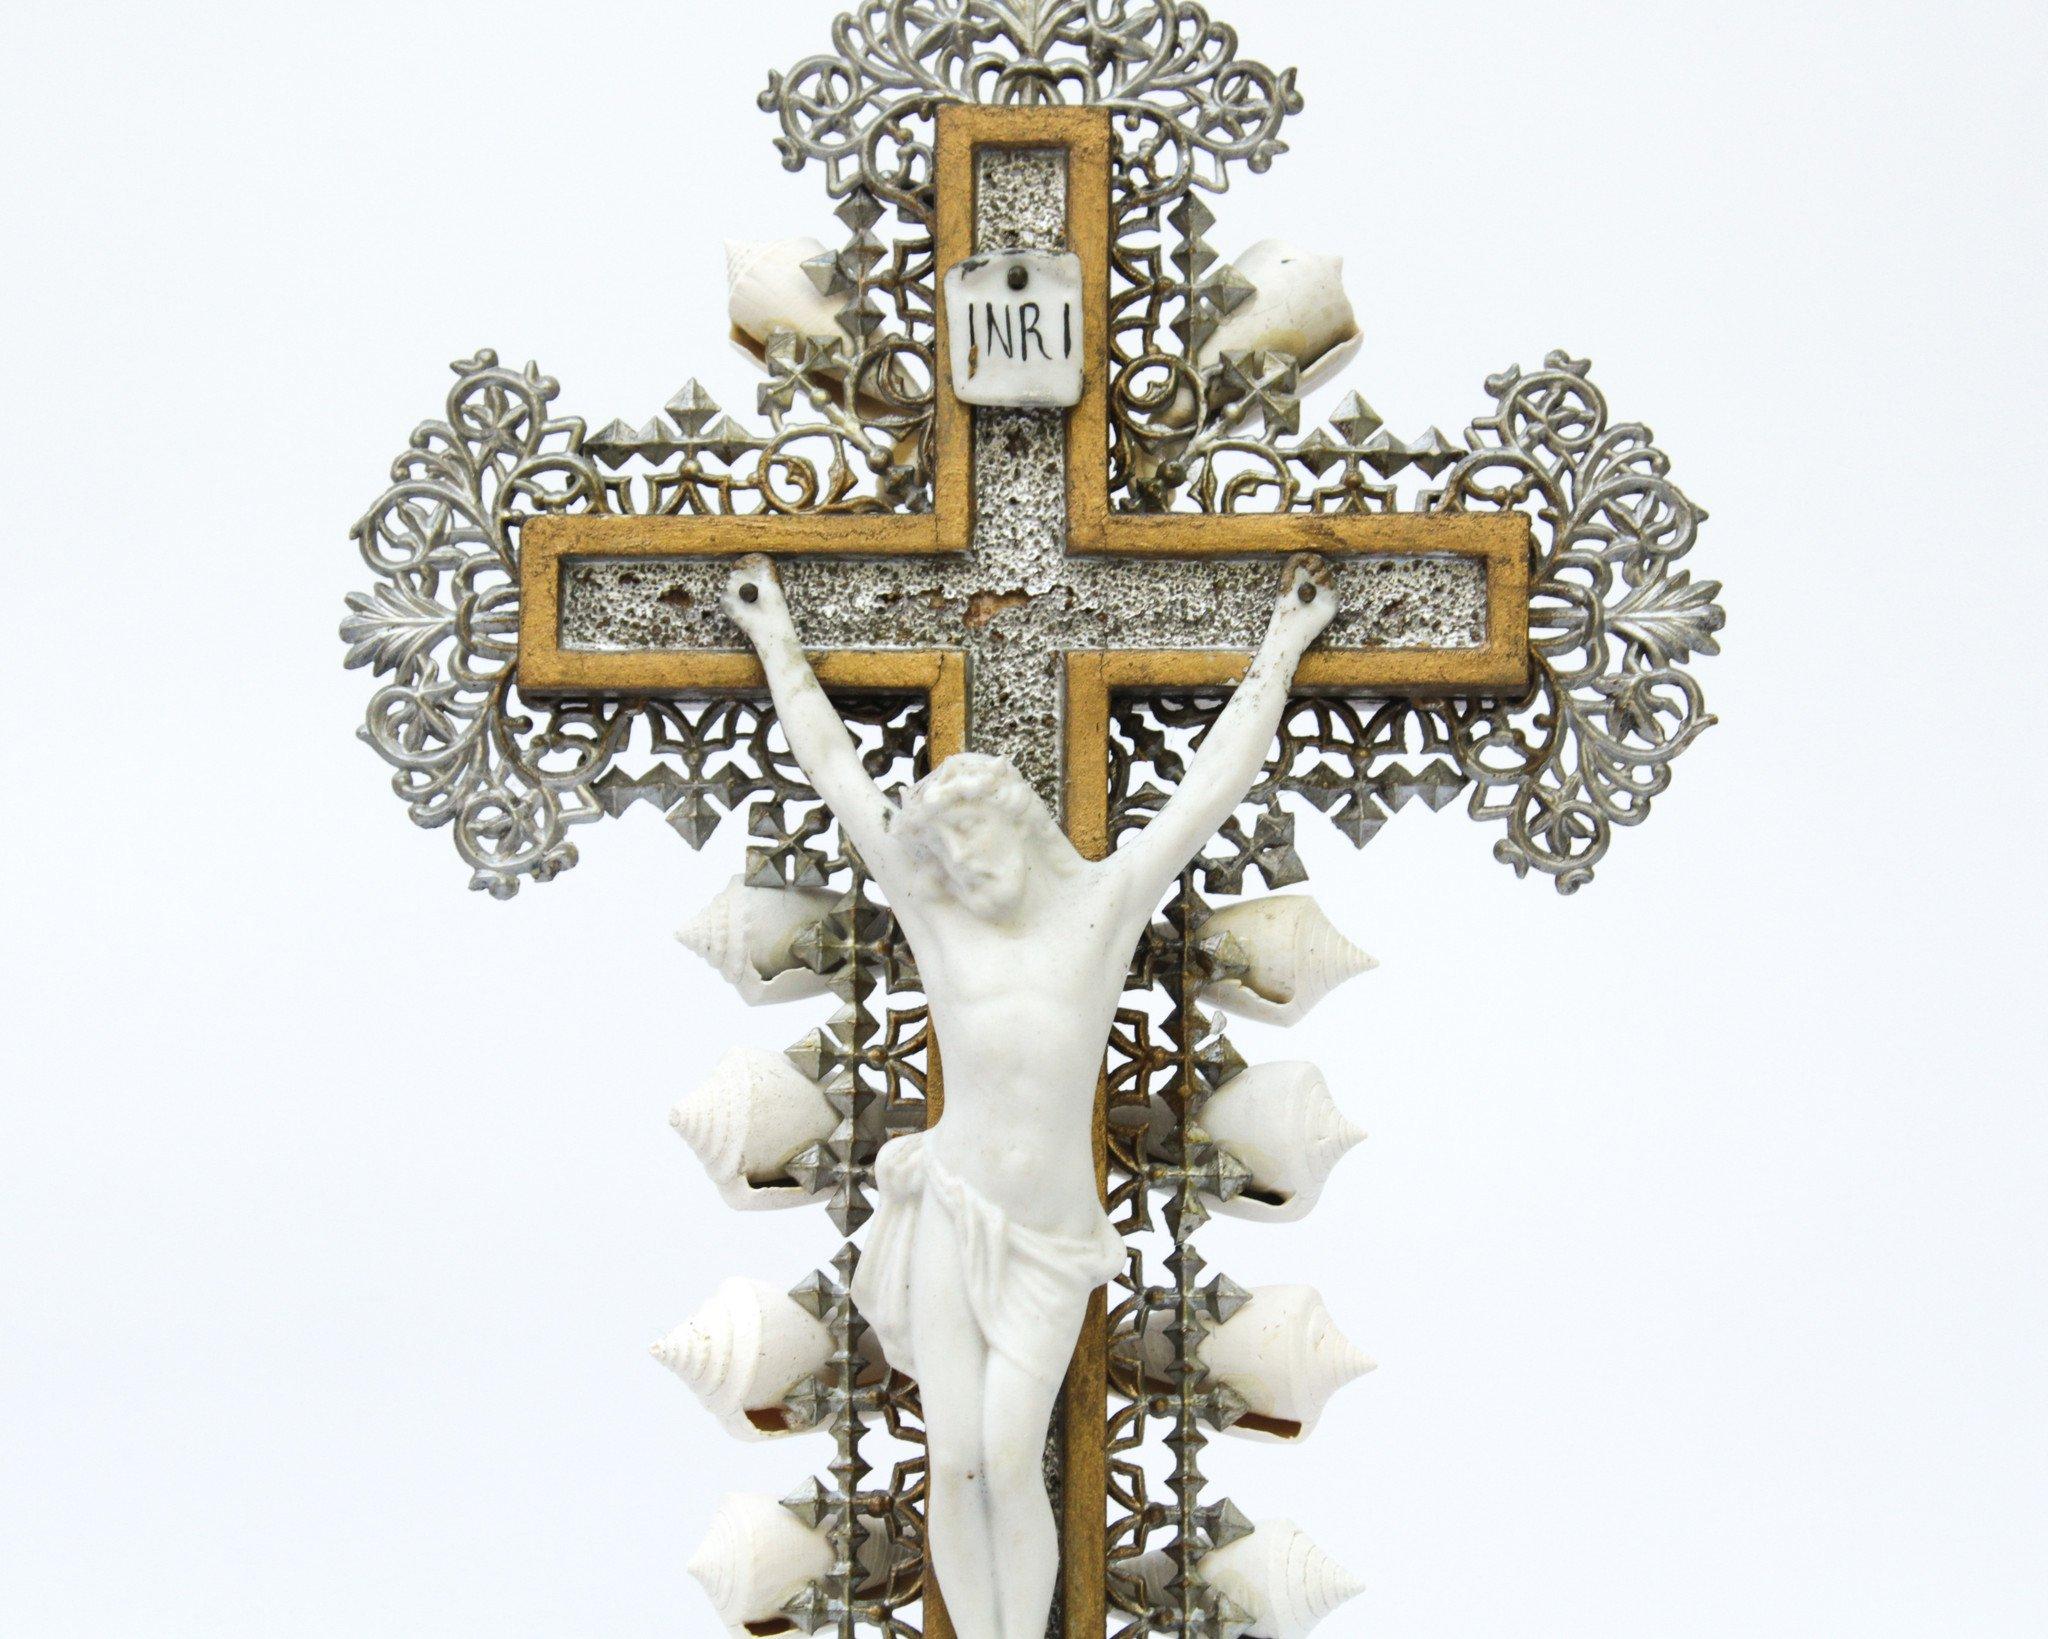 19th century French crucifix with metal filigree and a bisque corpus Christi decorated with fossil shells on Lucite.